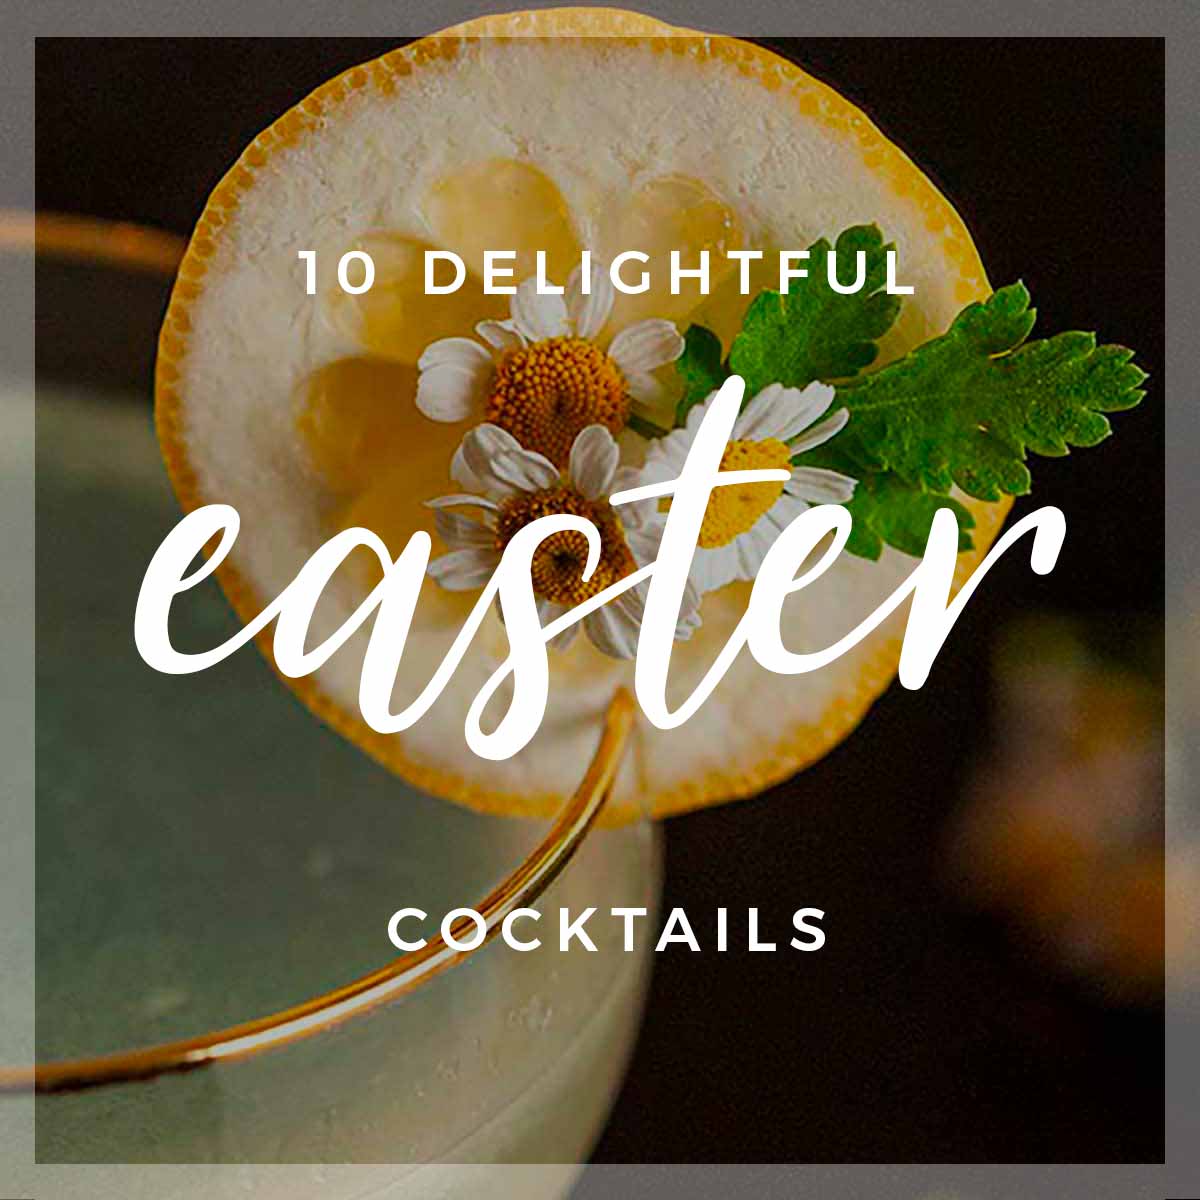 A lemon cocktail garnish with a title that says "10 Delightful Easter Cocktails."